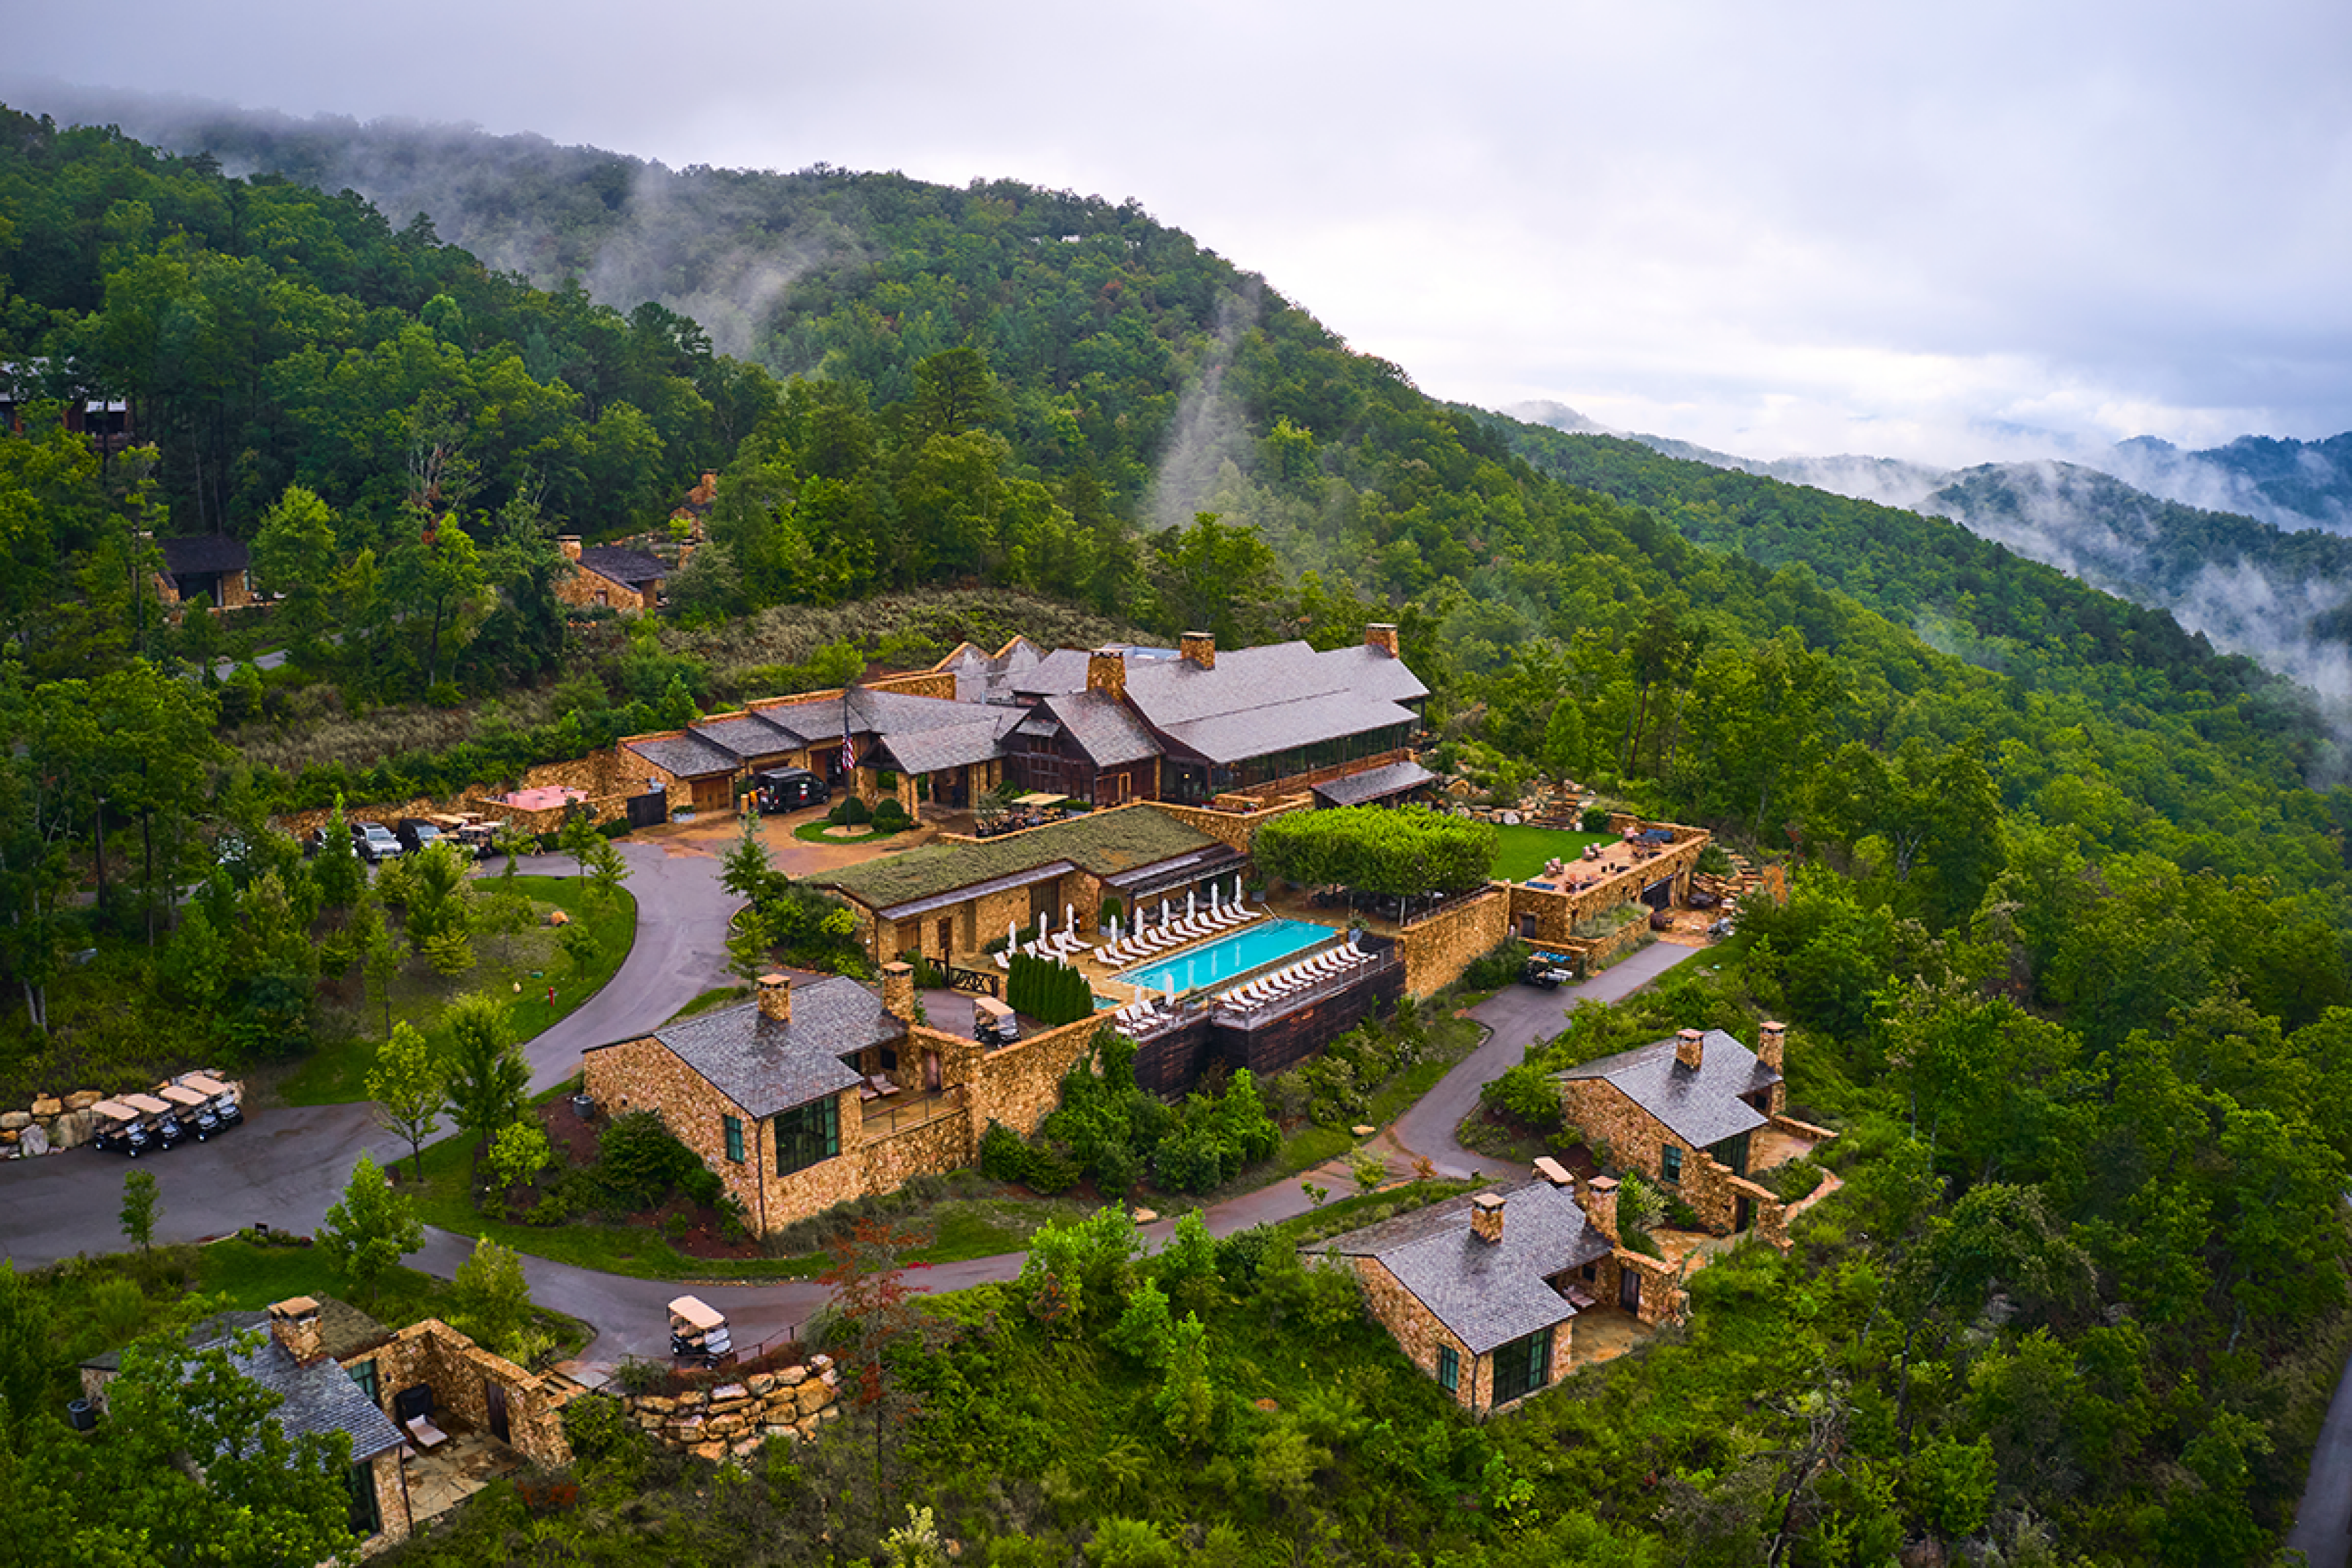 Blackberry Mountain from an arial view. With entire property and pool. Fog on the mountains.